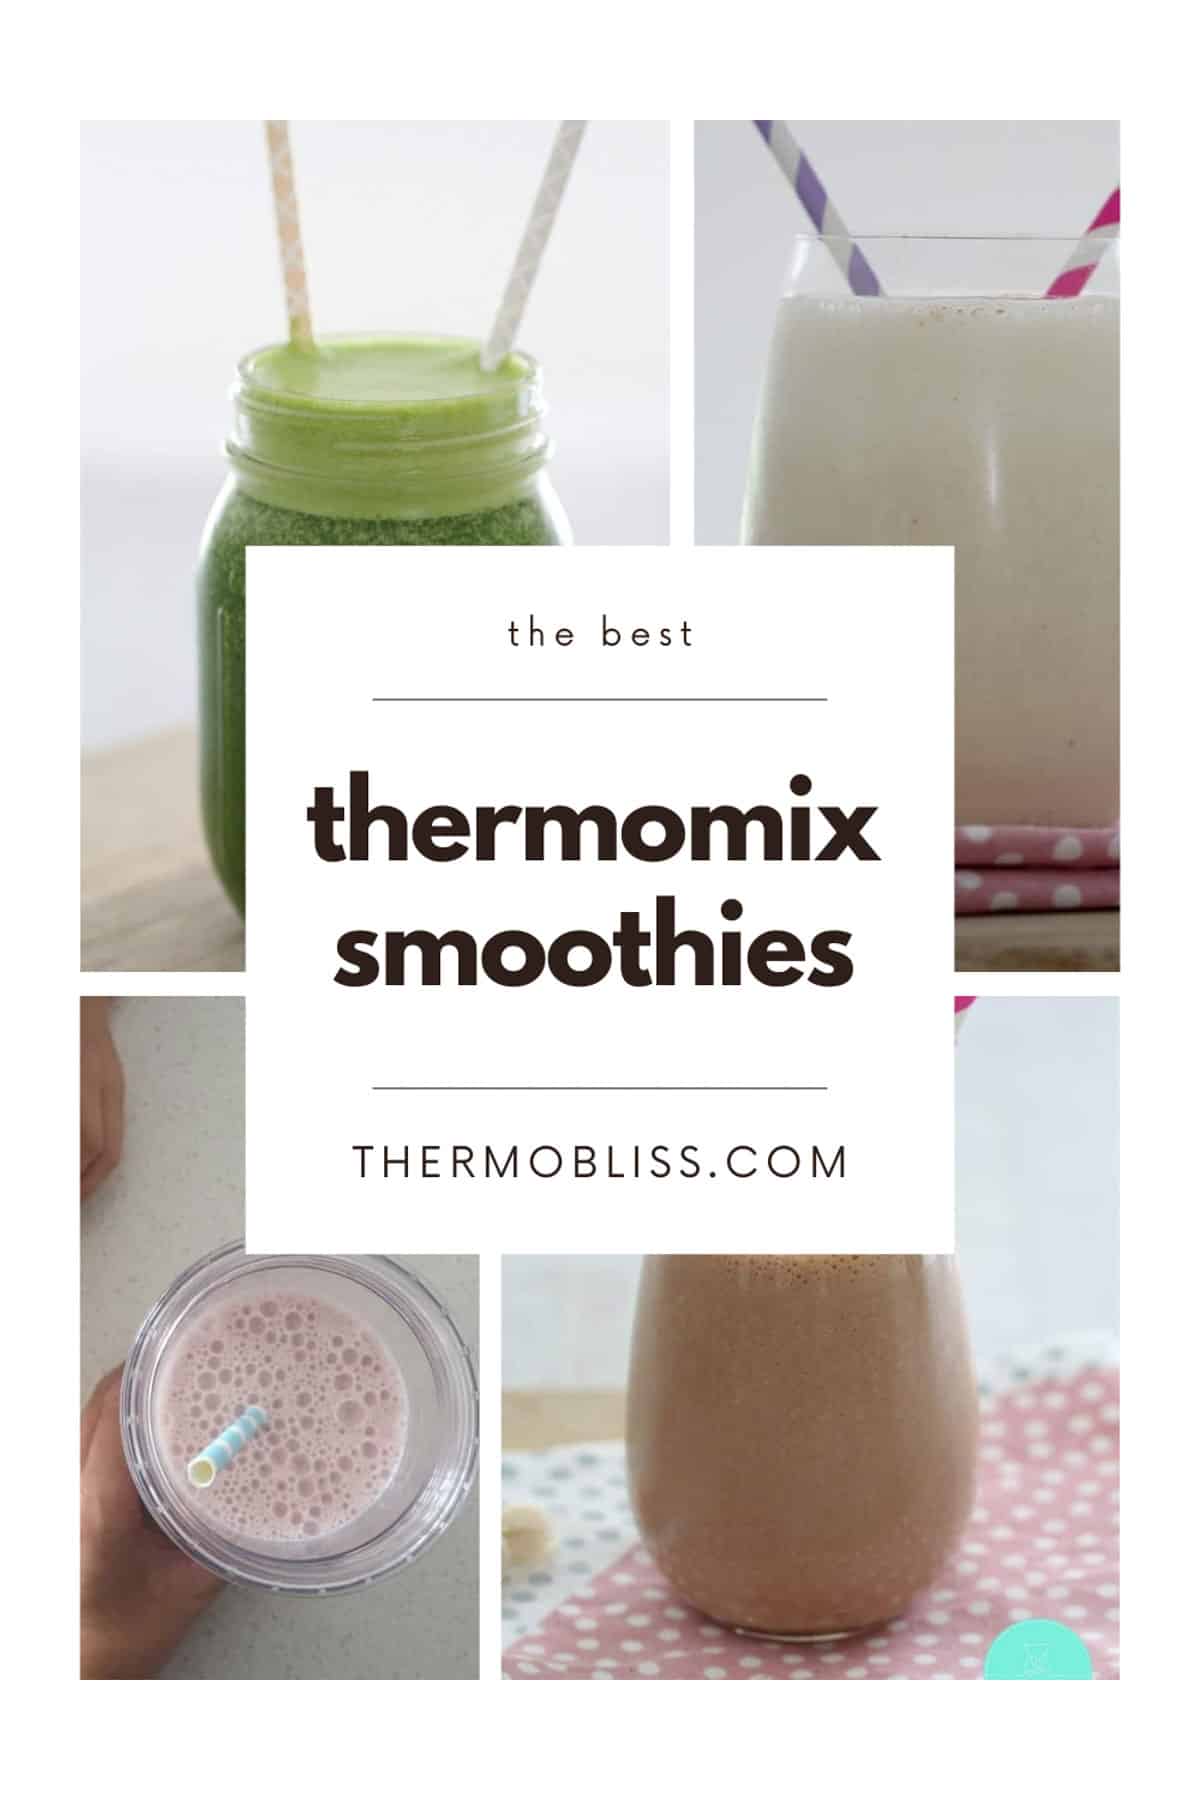 A collage of smoothie recipes made in a Thermomix machine.